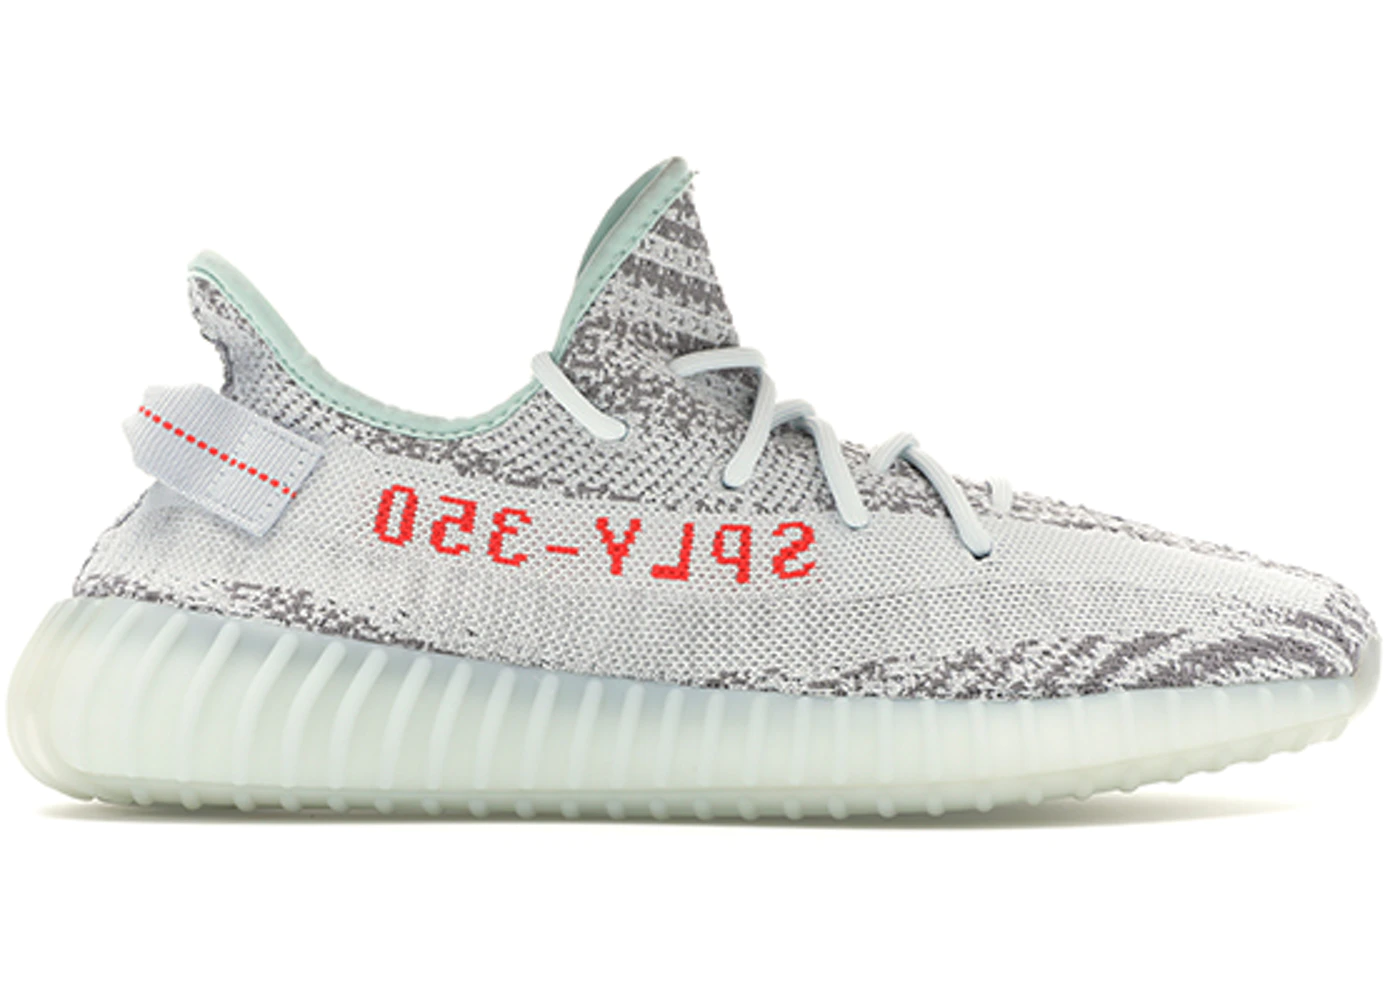 Adidas-Yeezy-Boost-350-V2-Blue-Tint-Product